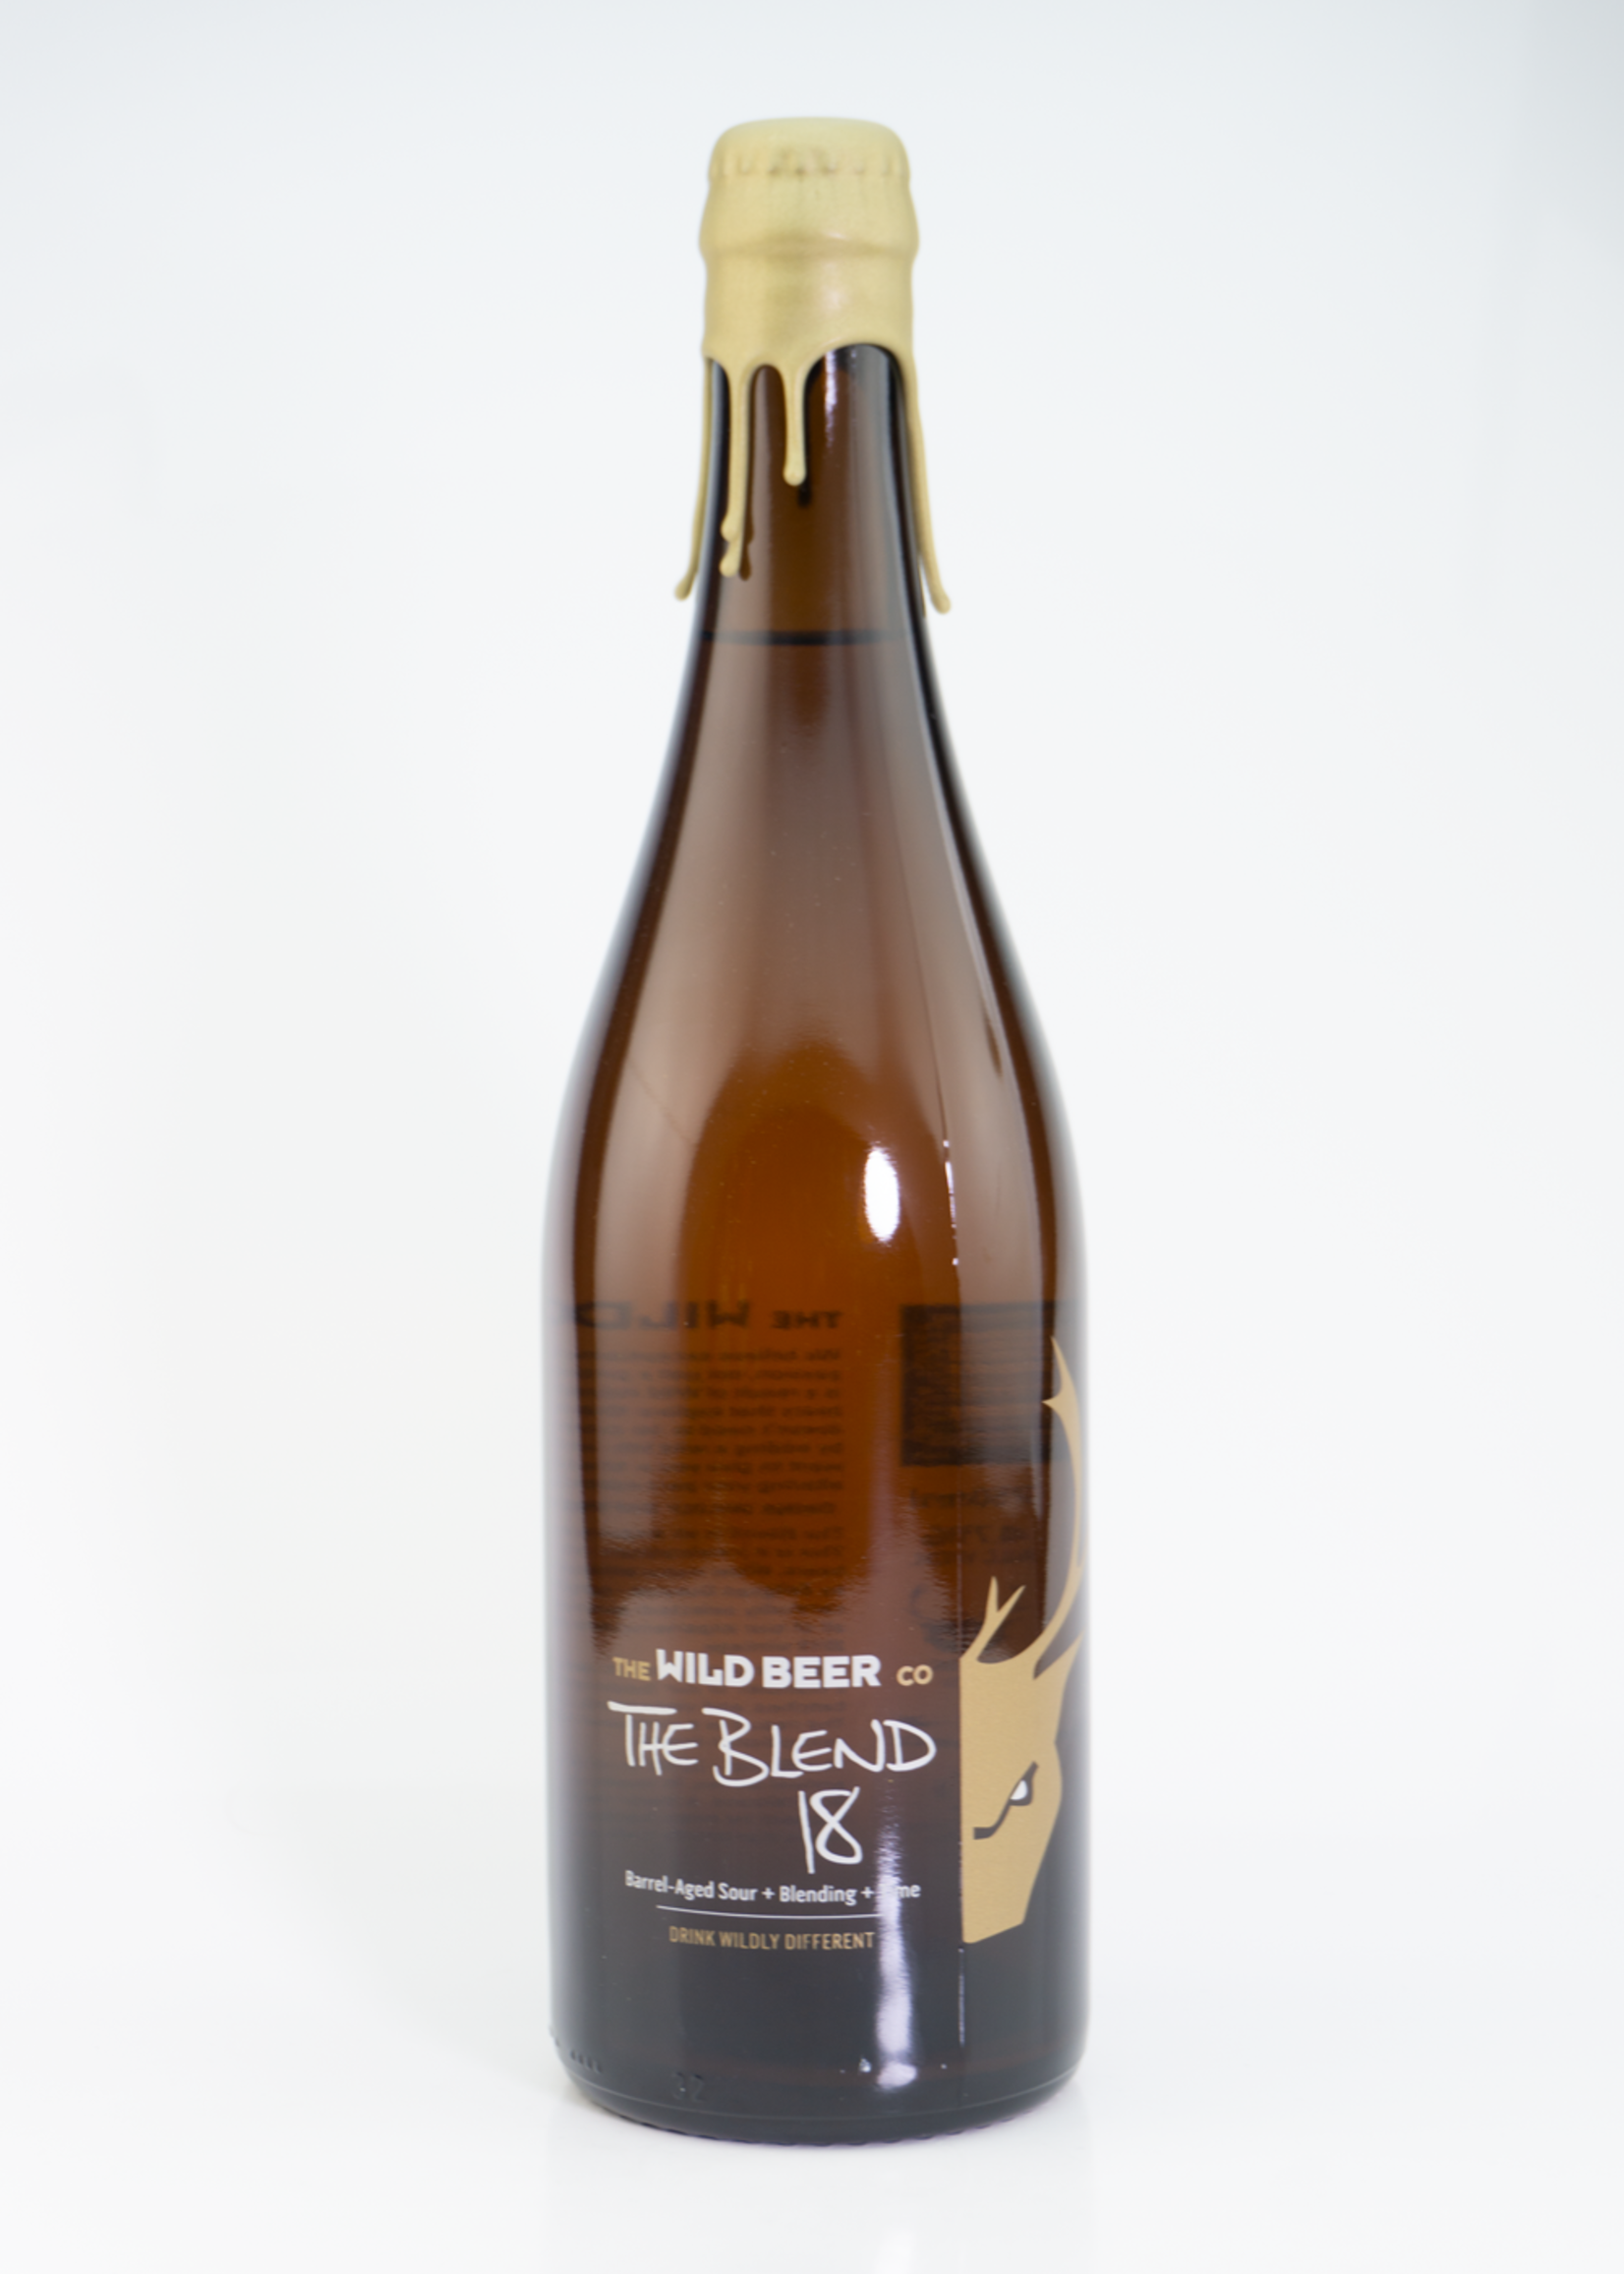 Wild Beer Co. The Blend 18